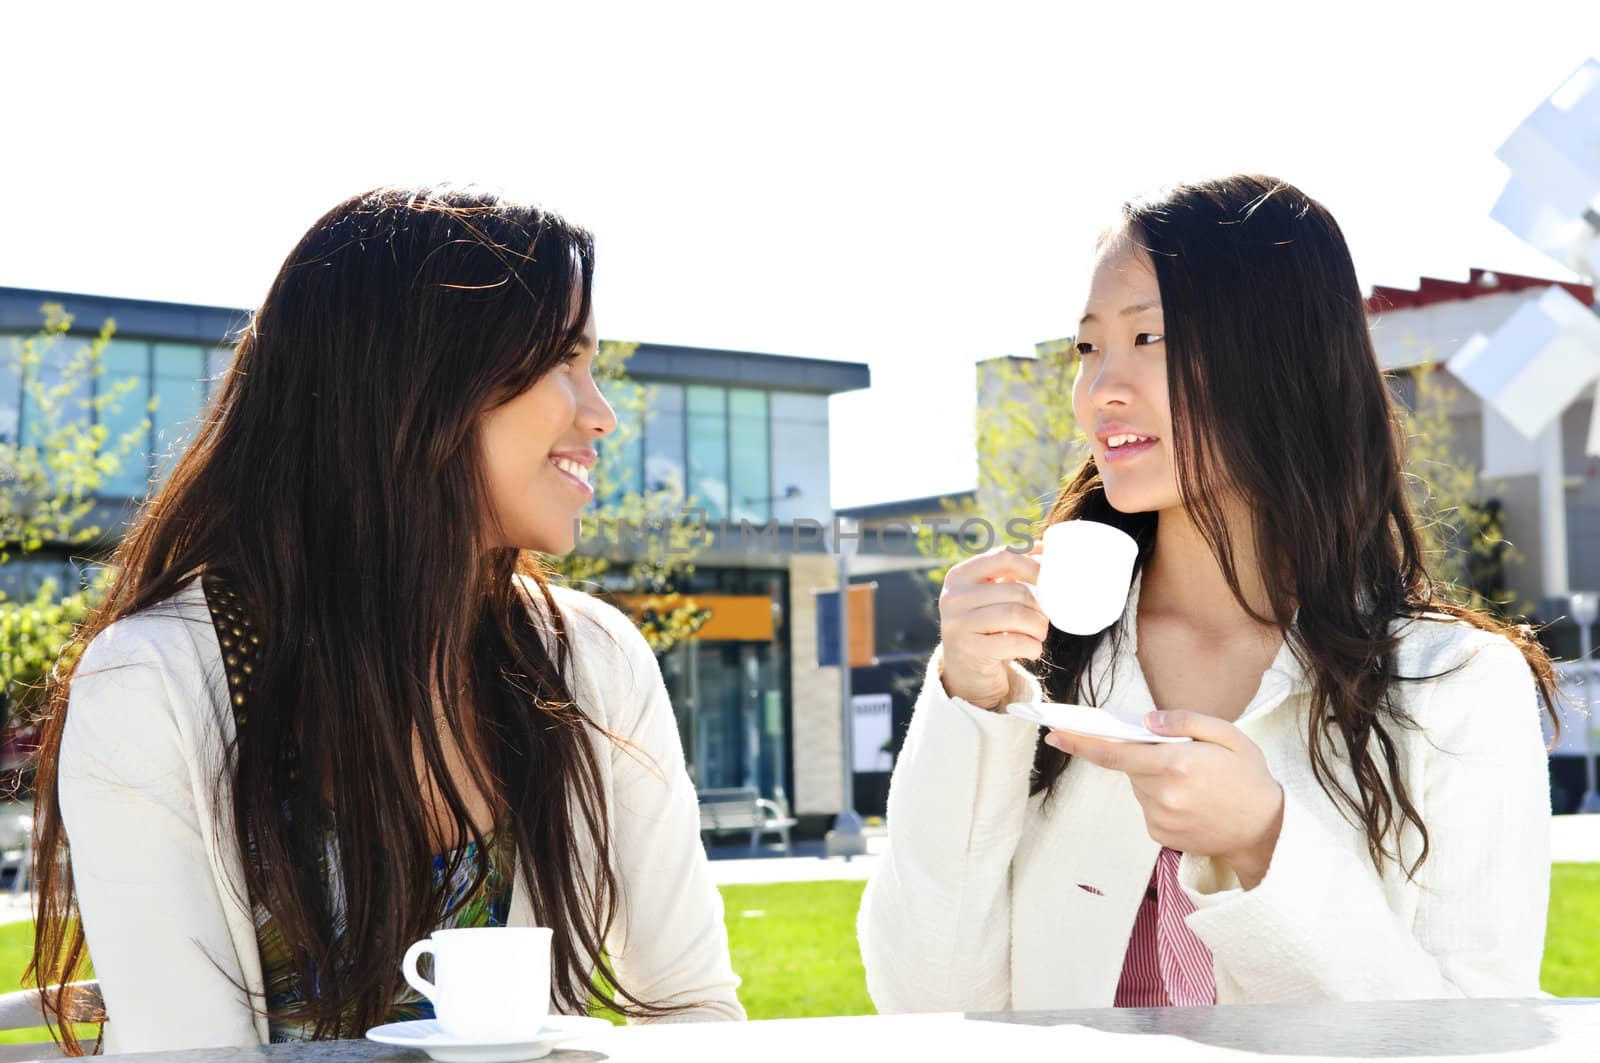 Two girl friends sitting and having drinks at outdoor mall